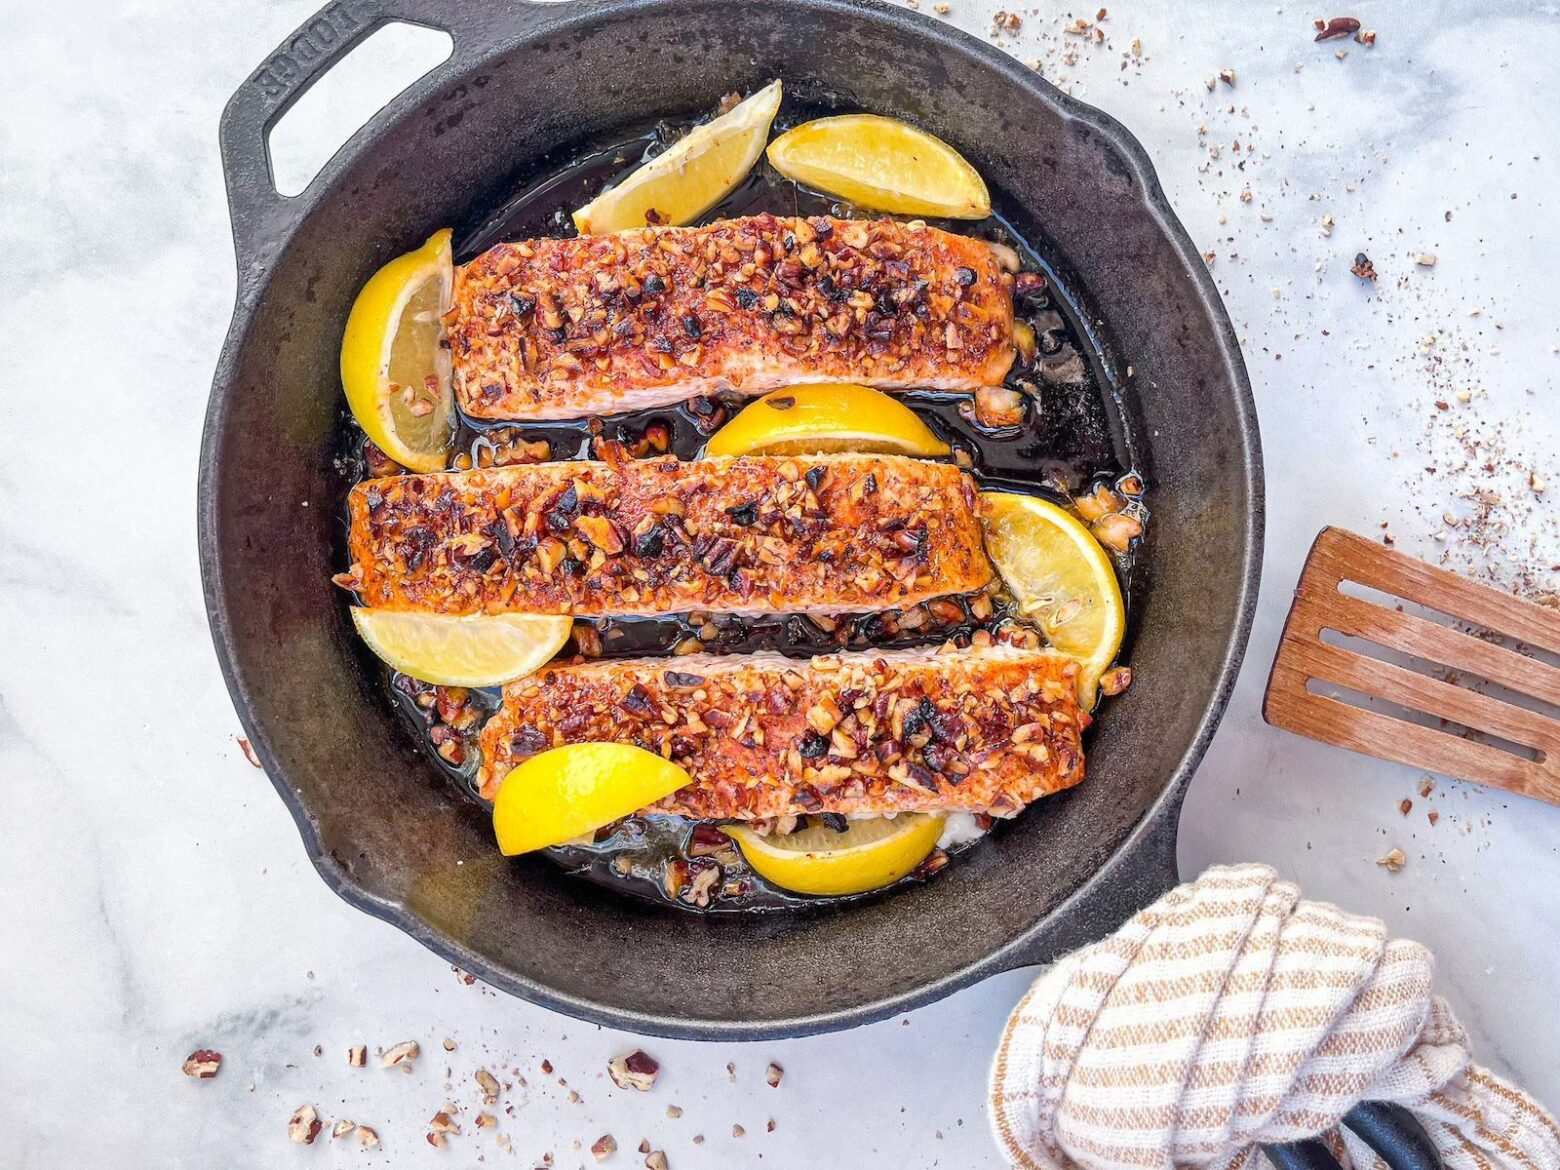 From above, an iron skillet with three pecan crusted salmon fillet slices surrounded by lemon wedges.